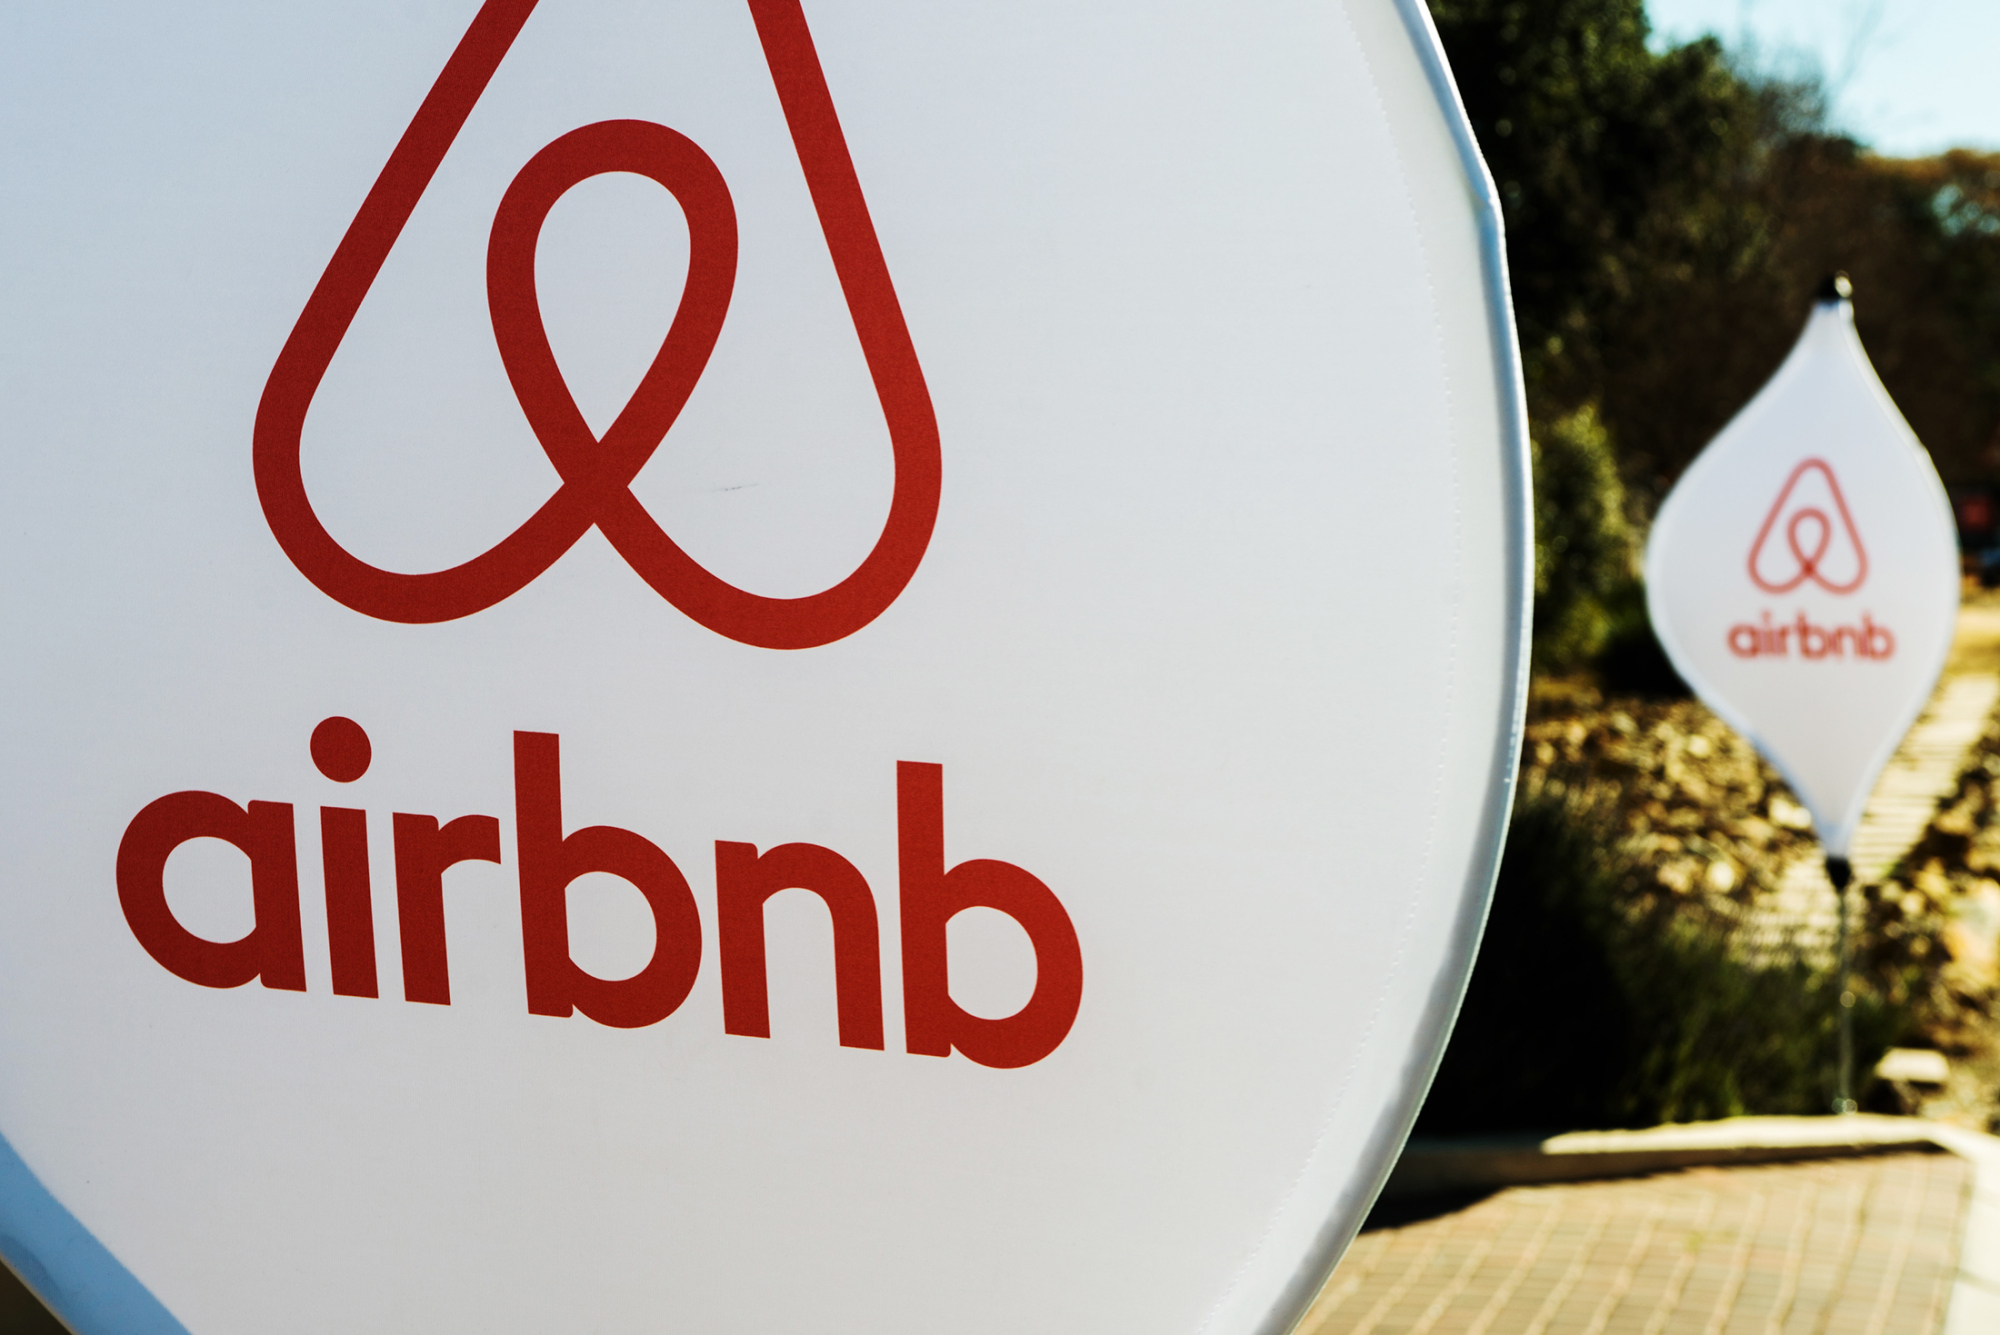 Airbnb urges Penang Govt to reconsider draft proposal for short-term rental accommodation